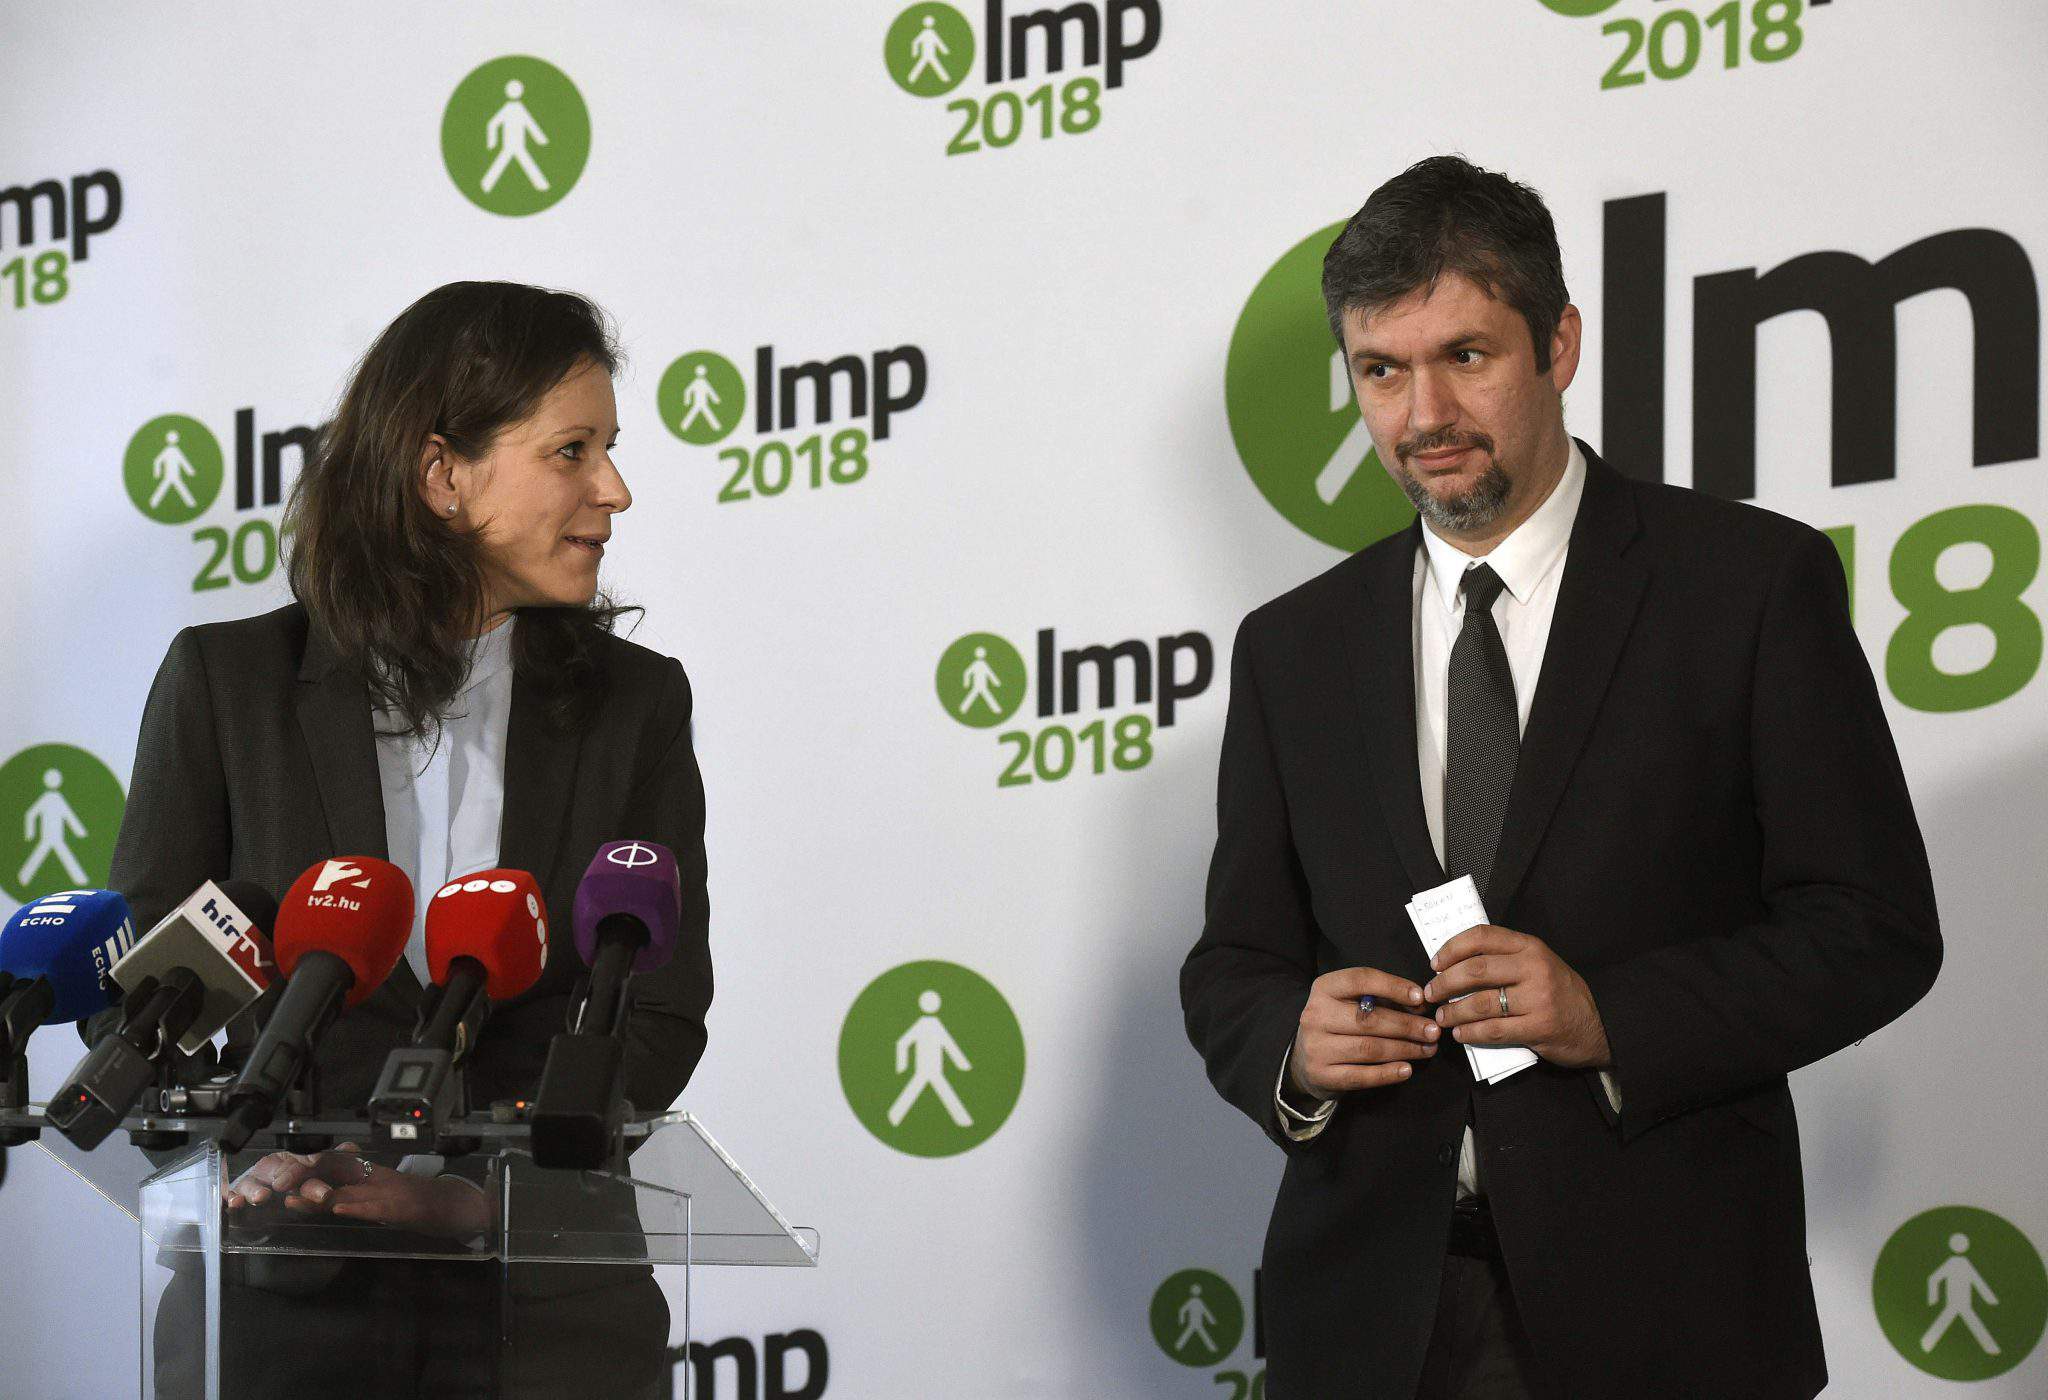 LMP green party